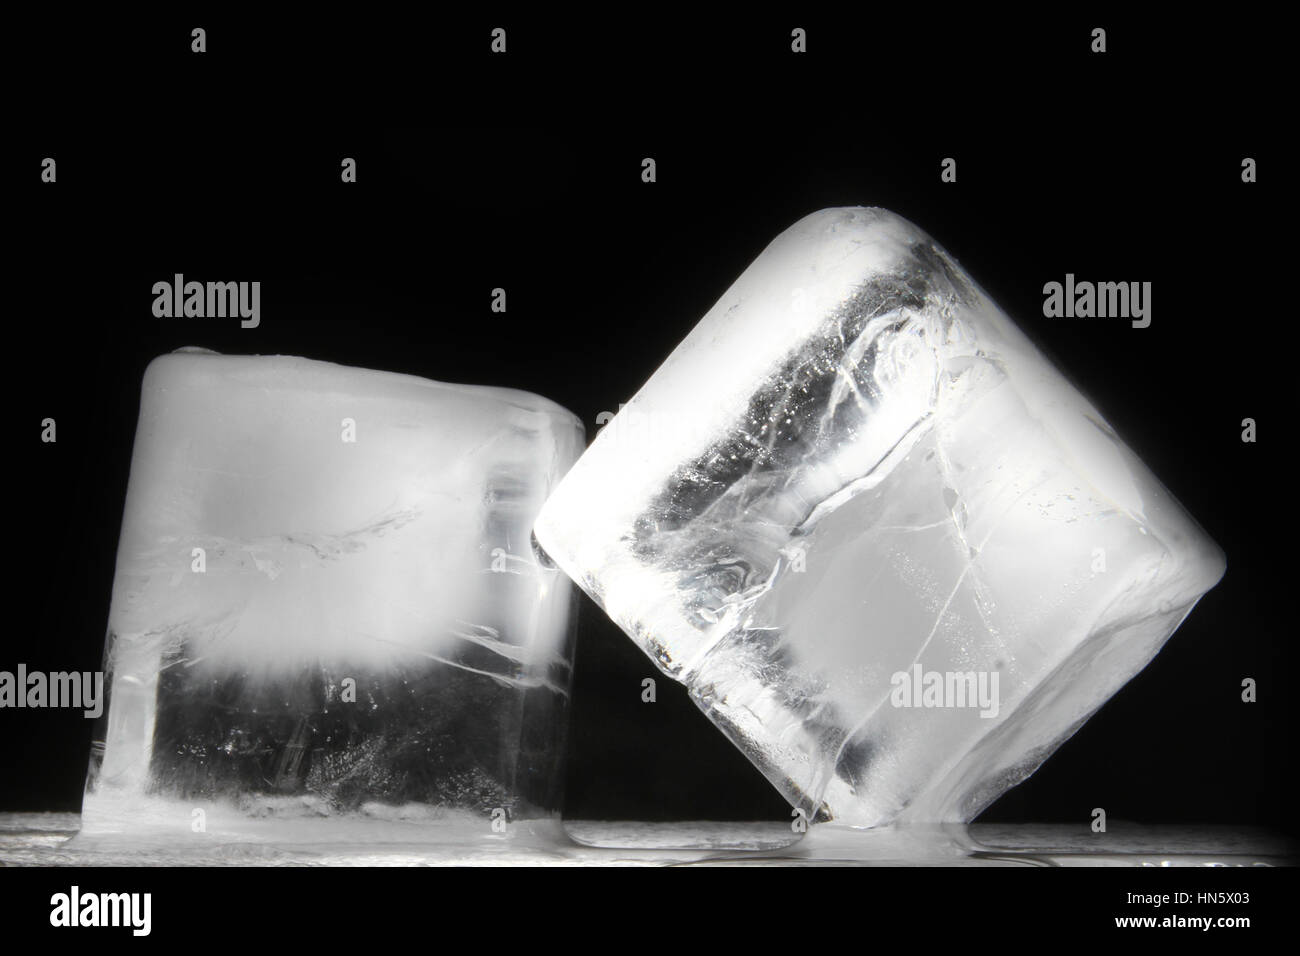 https://c8.alamy.com/comp/HN5X03/ice-block-ice-is-water-frozen-into-a-solid-state-depending-on-the-HN5X03.jpg